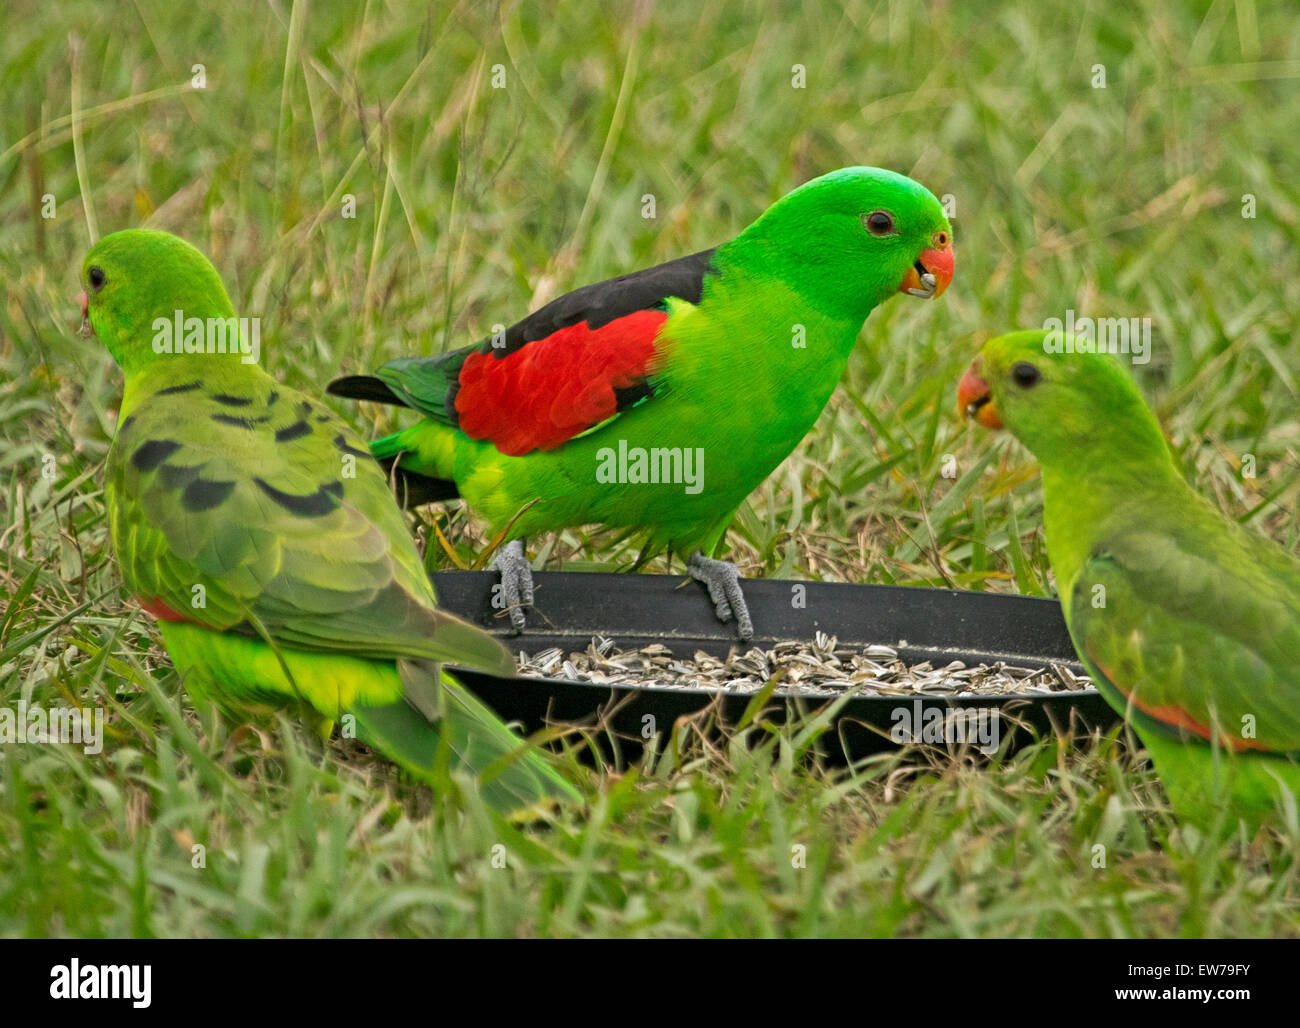 Spectacular male and female red-winged parrots Aprosmictus erythropterus, Australian native birds at bird feeding tray in urban garden Stock Photo